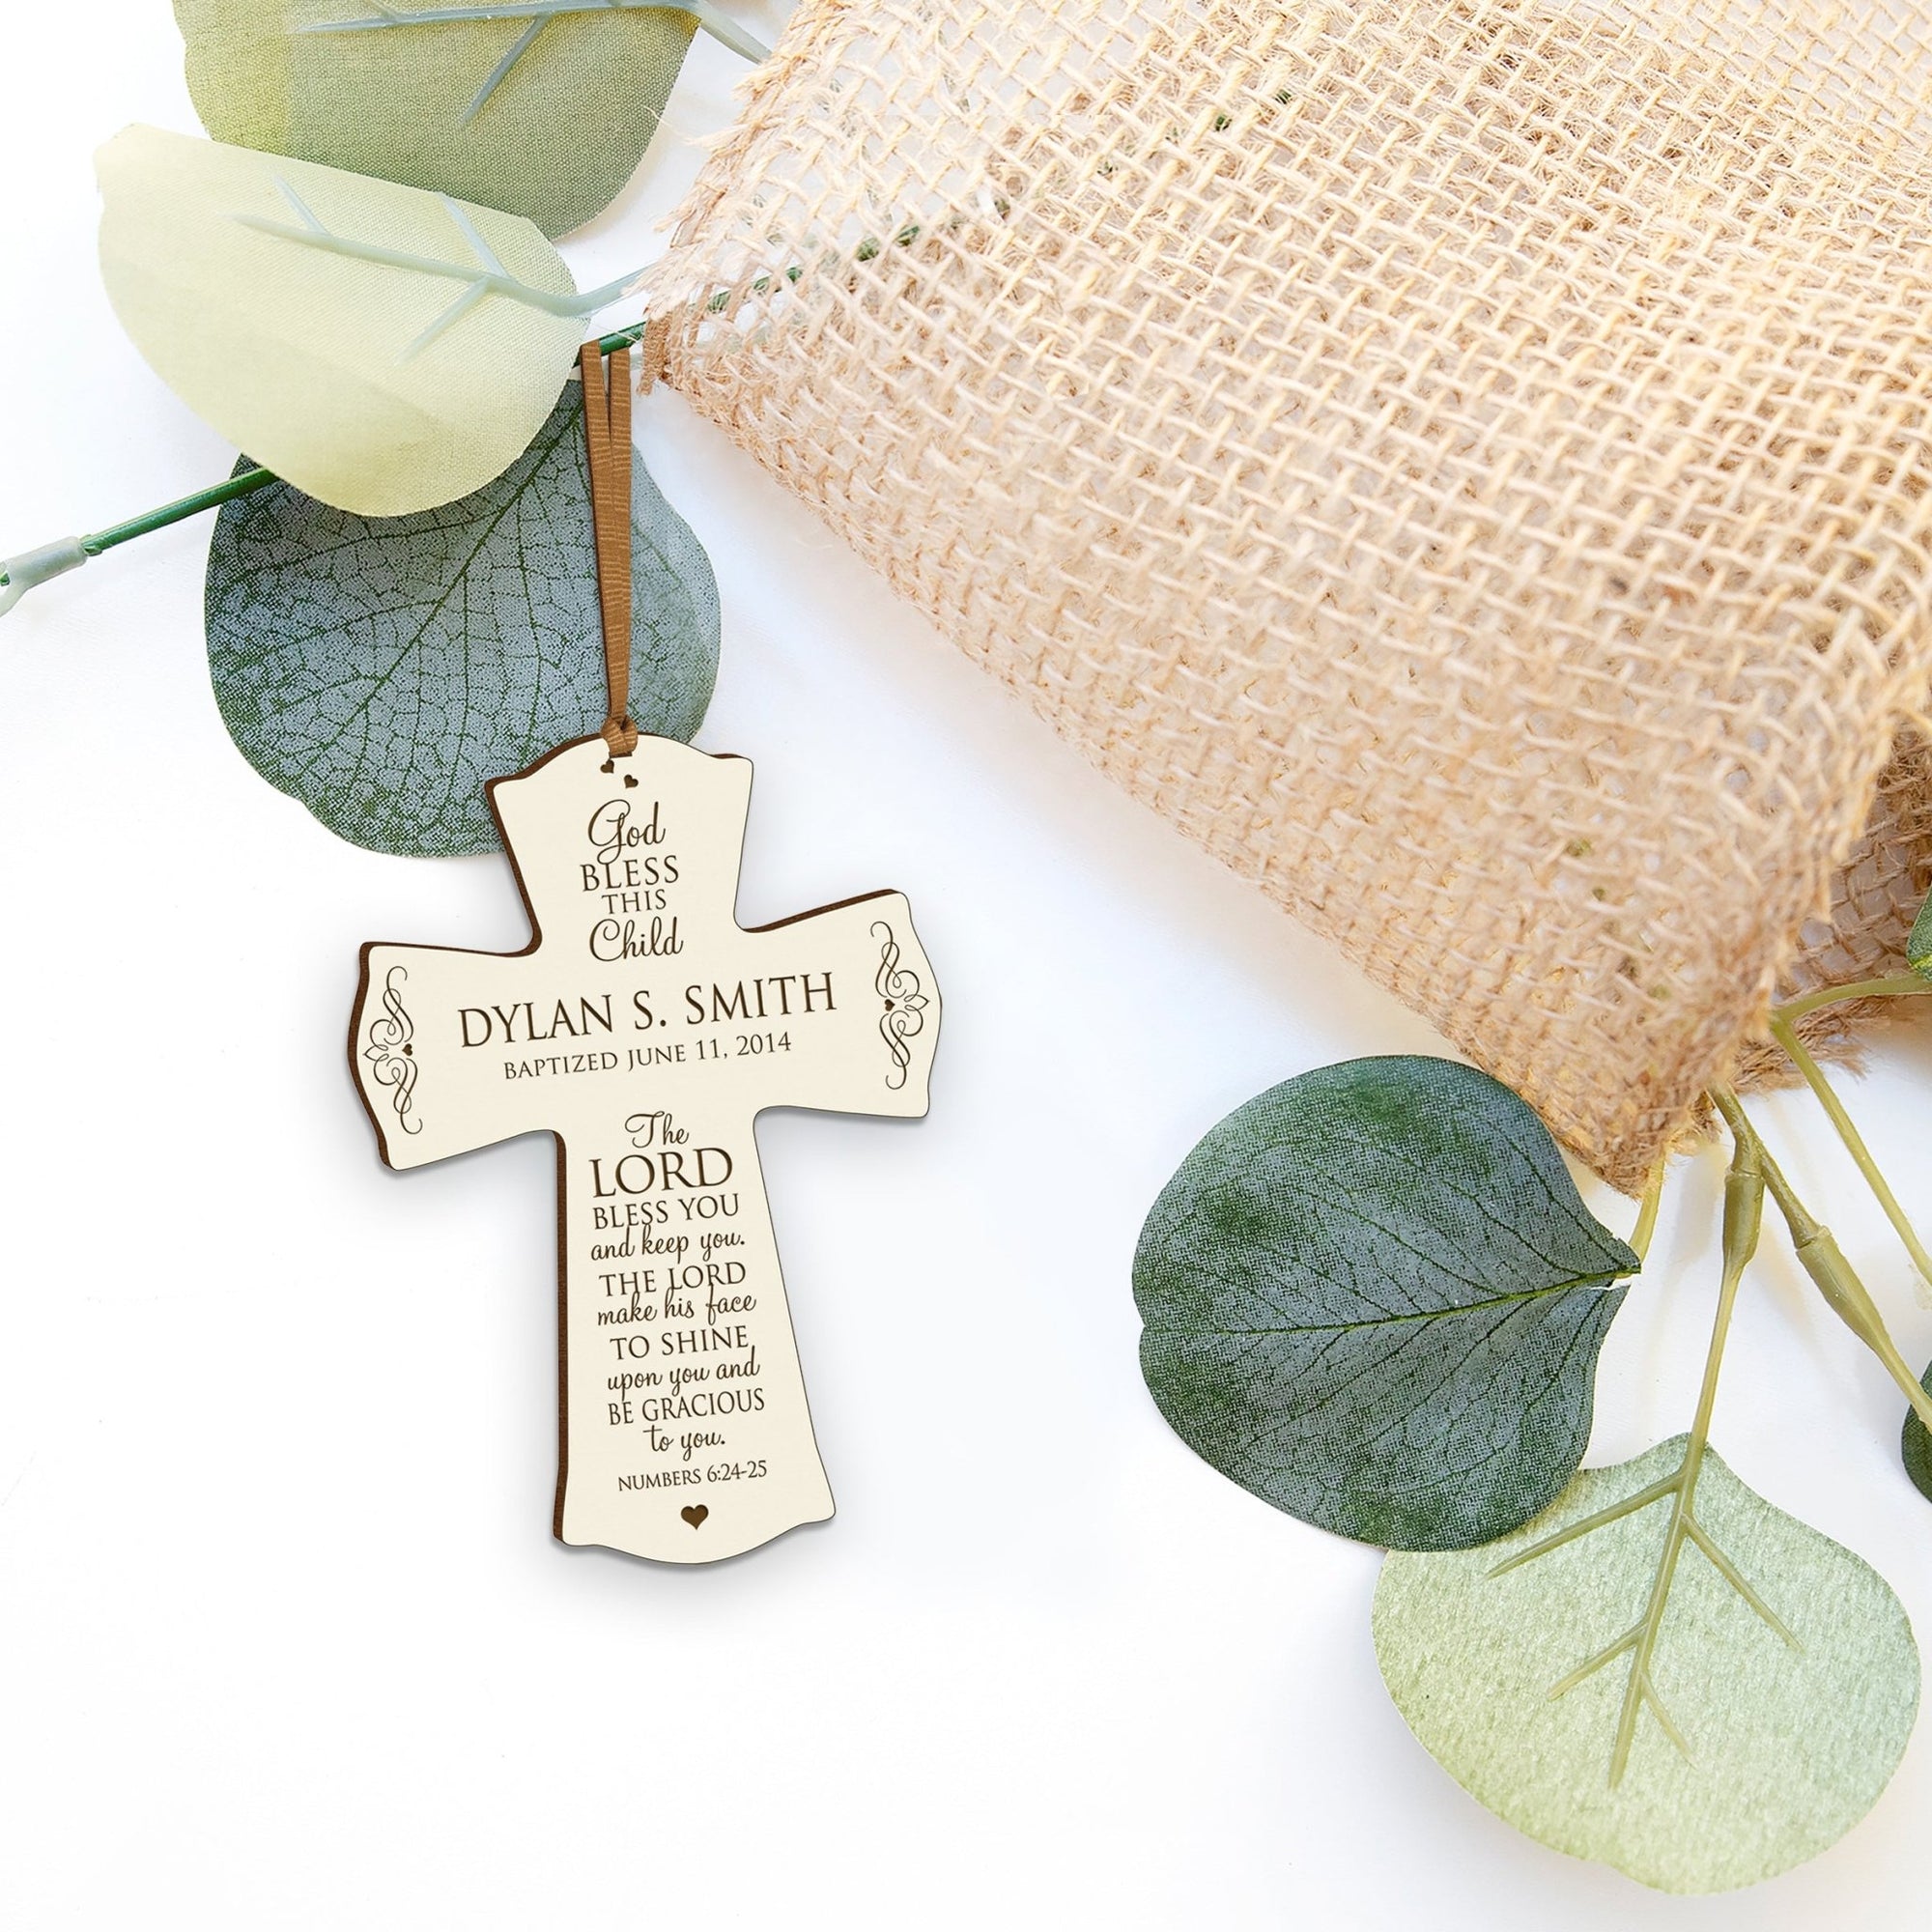 Personalized Christening Wooden Hanging Wall Cross - The Lord Bless You - LifeSong Milestones